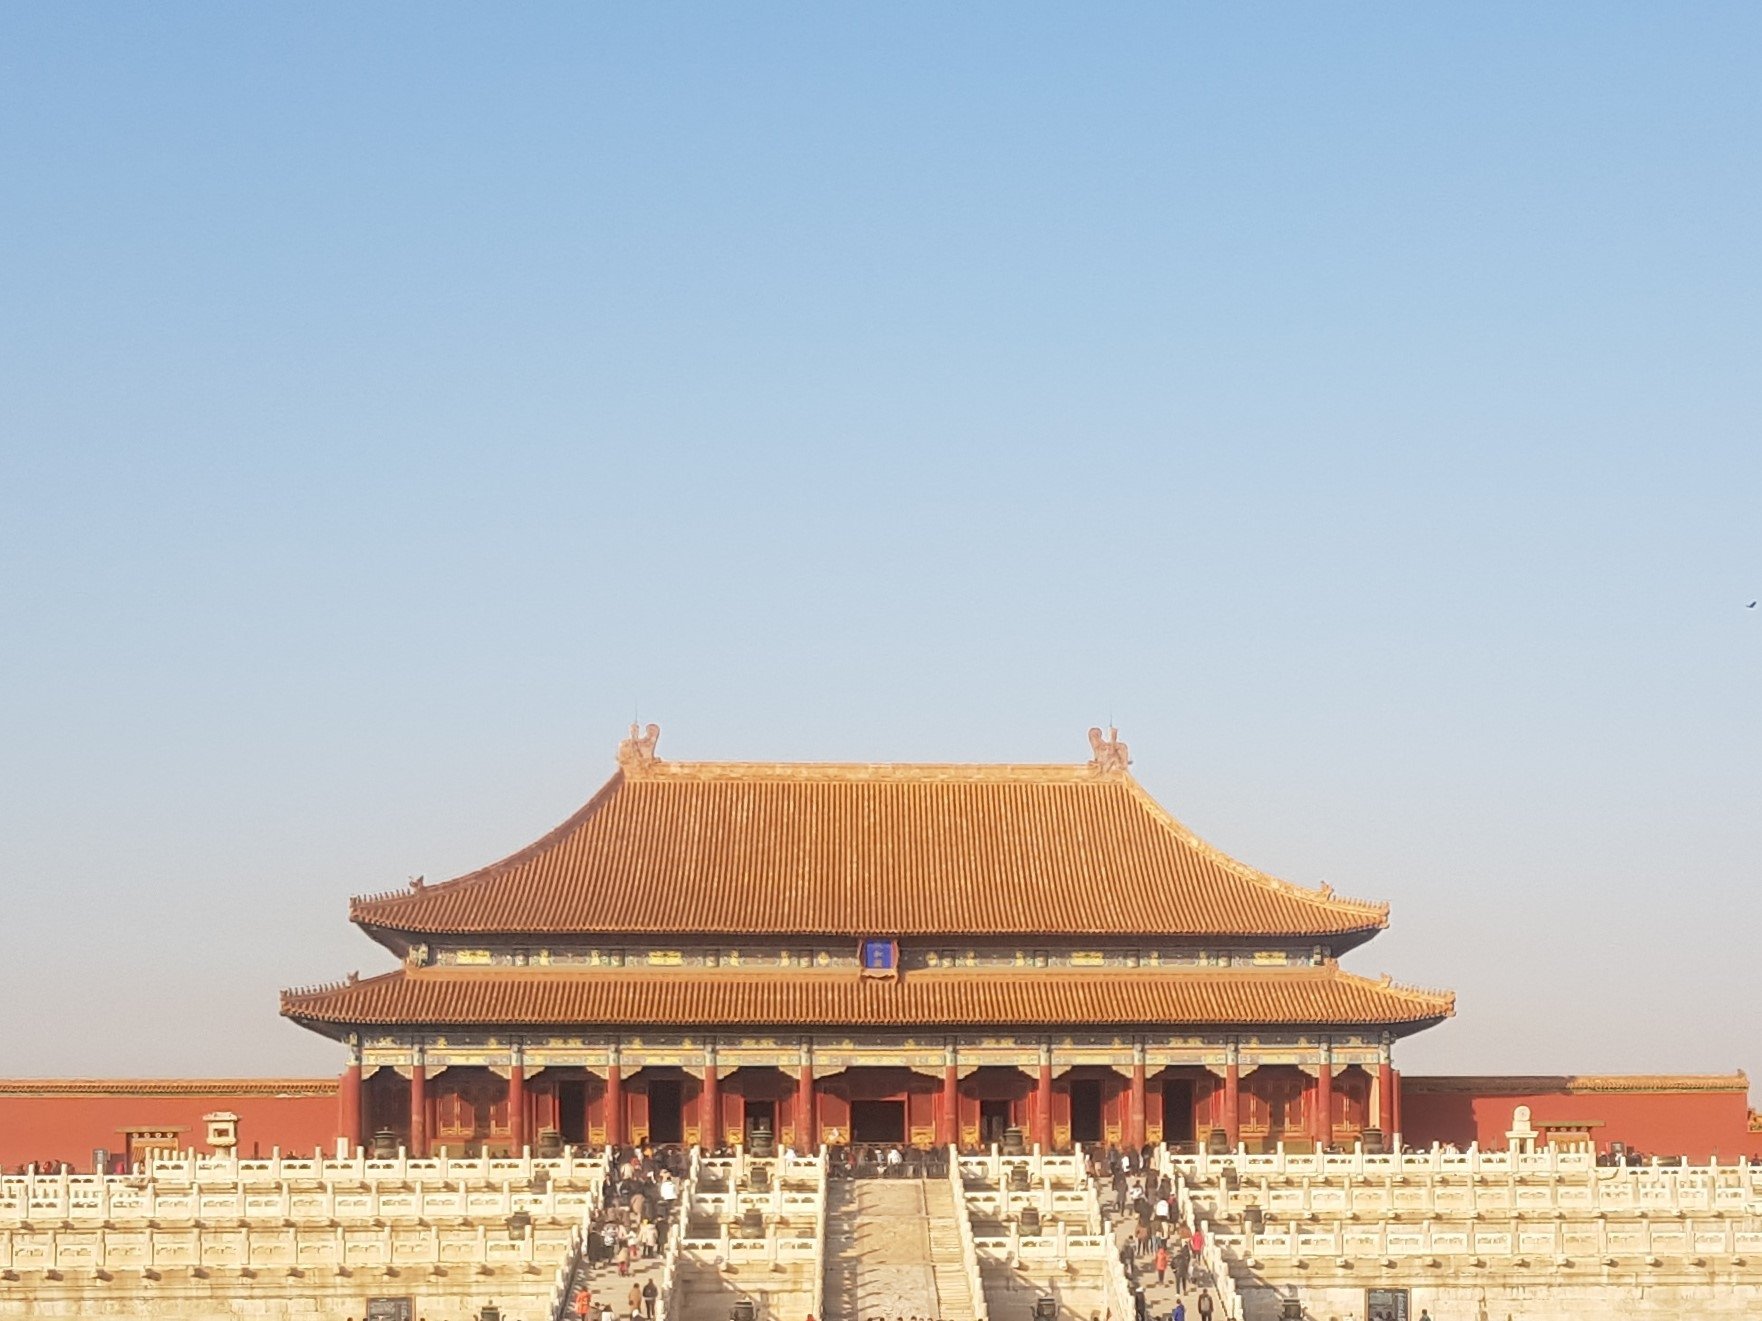 Walking in the Forbidden City, the Architecture Masterpiece of China